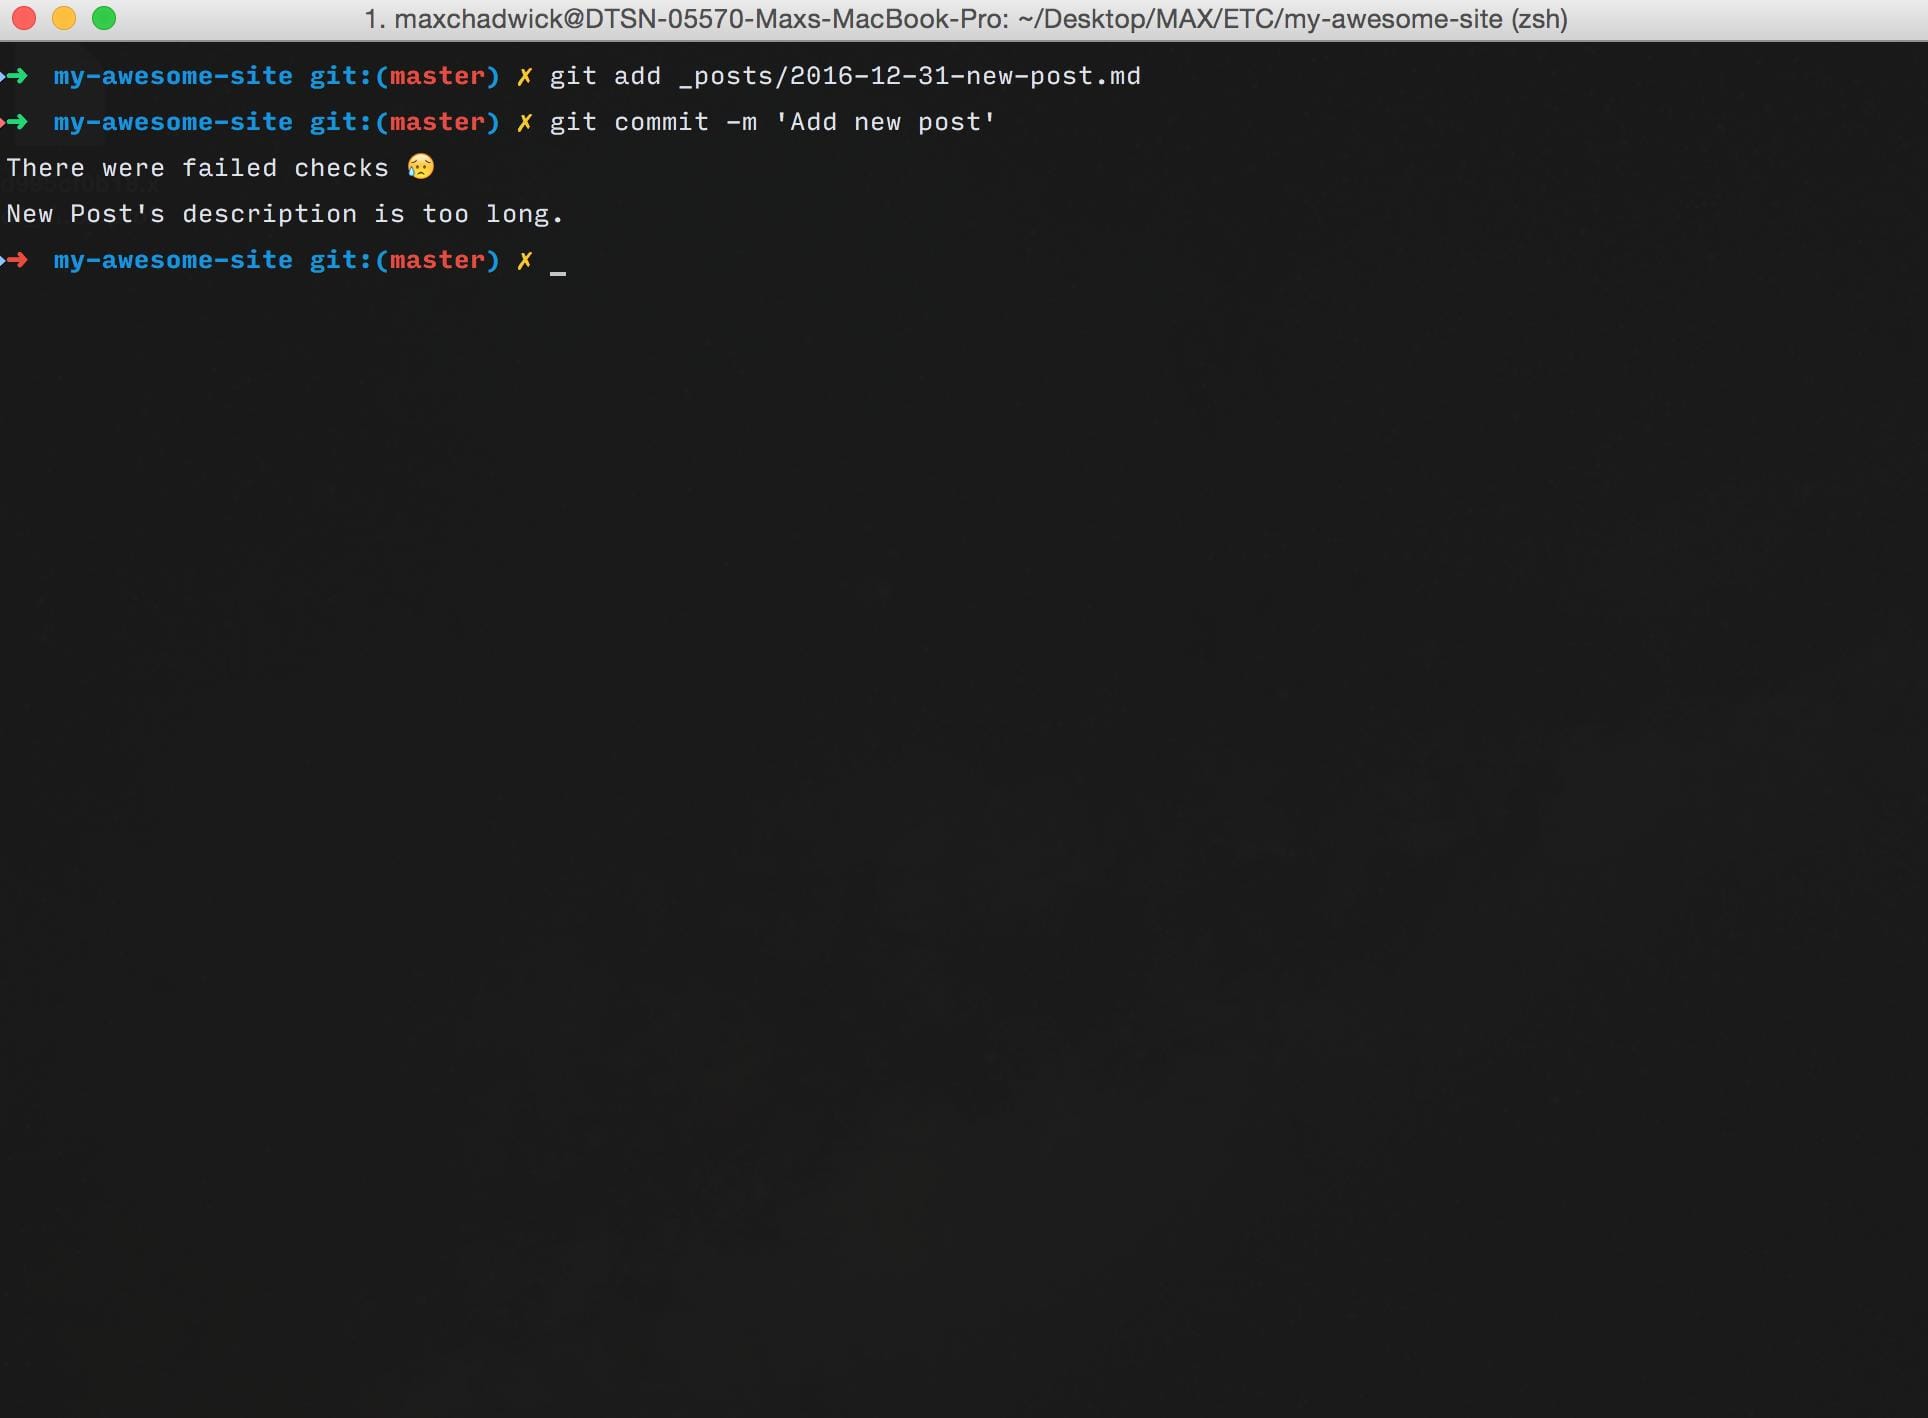 A screenshot of a terminal while using jekyll-pre-commit